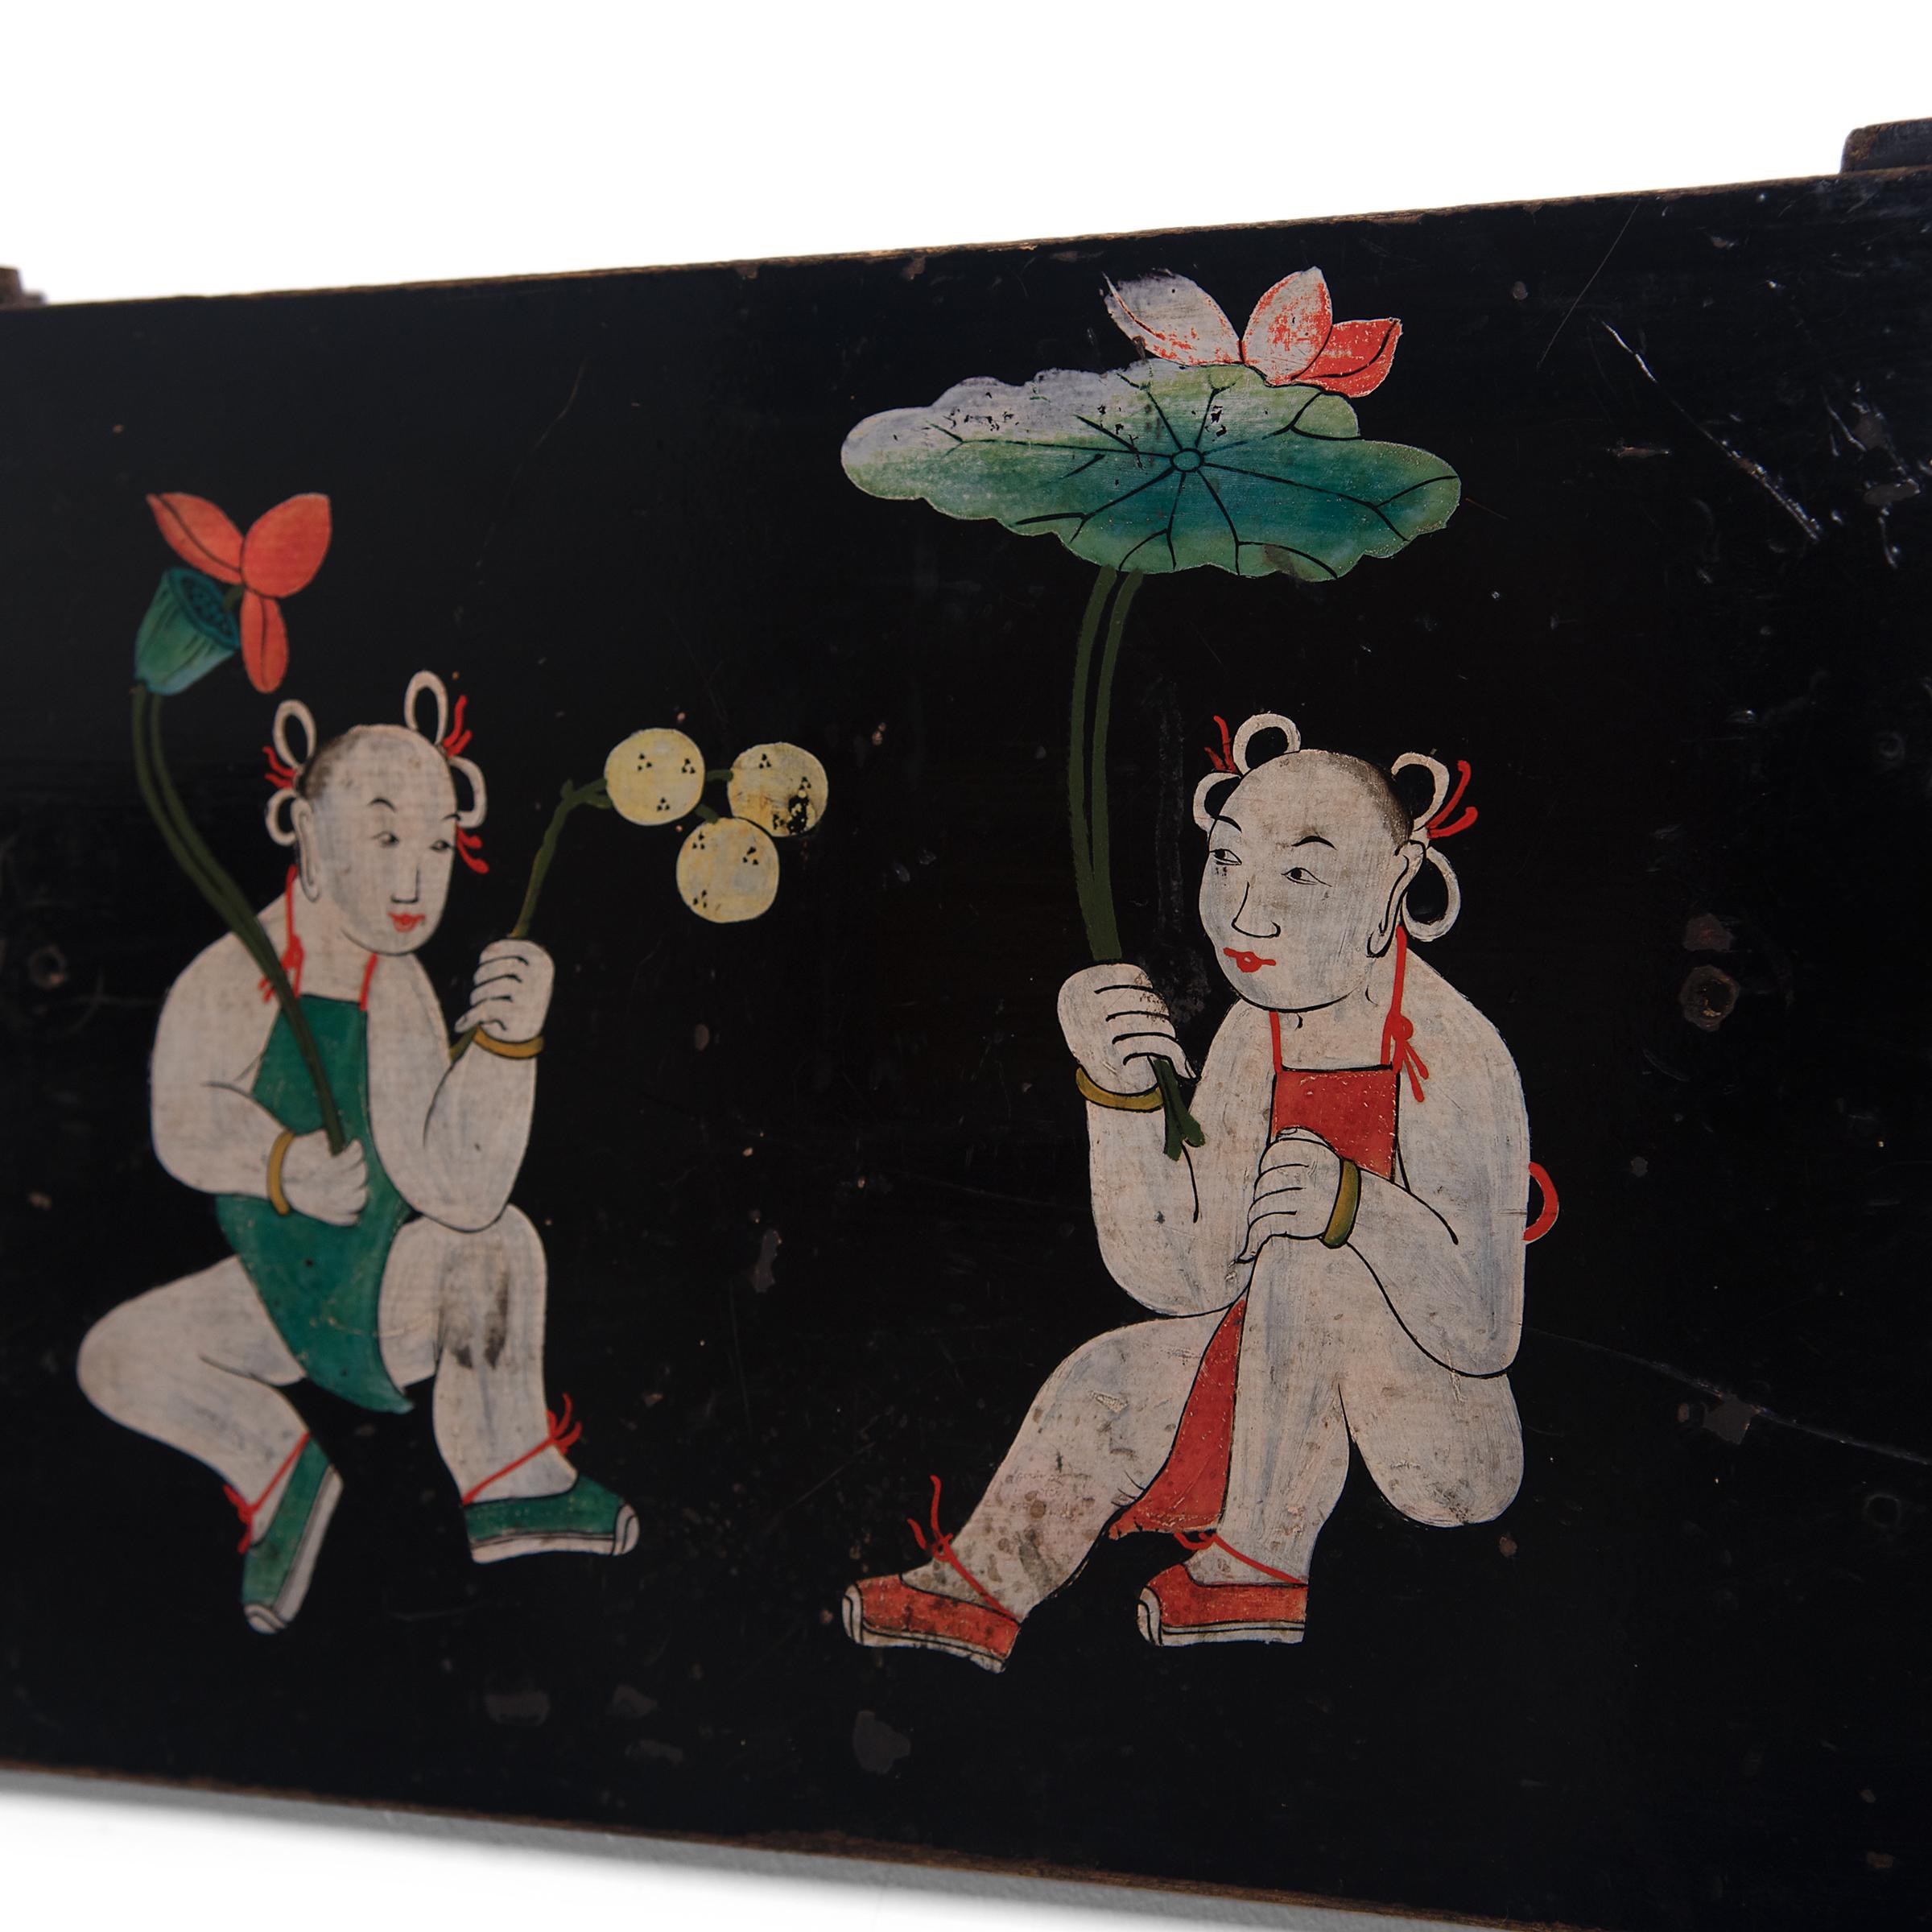 This folk hand painted panel, laden with meaning, was originally an interior painted panel of a large storage cabinet. The panel is painted with a scene of two young boys in traditional aprons, a motif commonly referred to as 